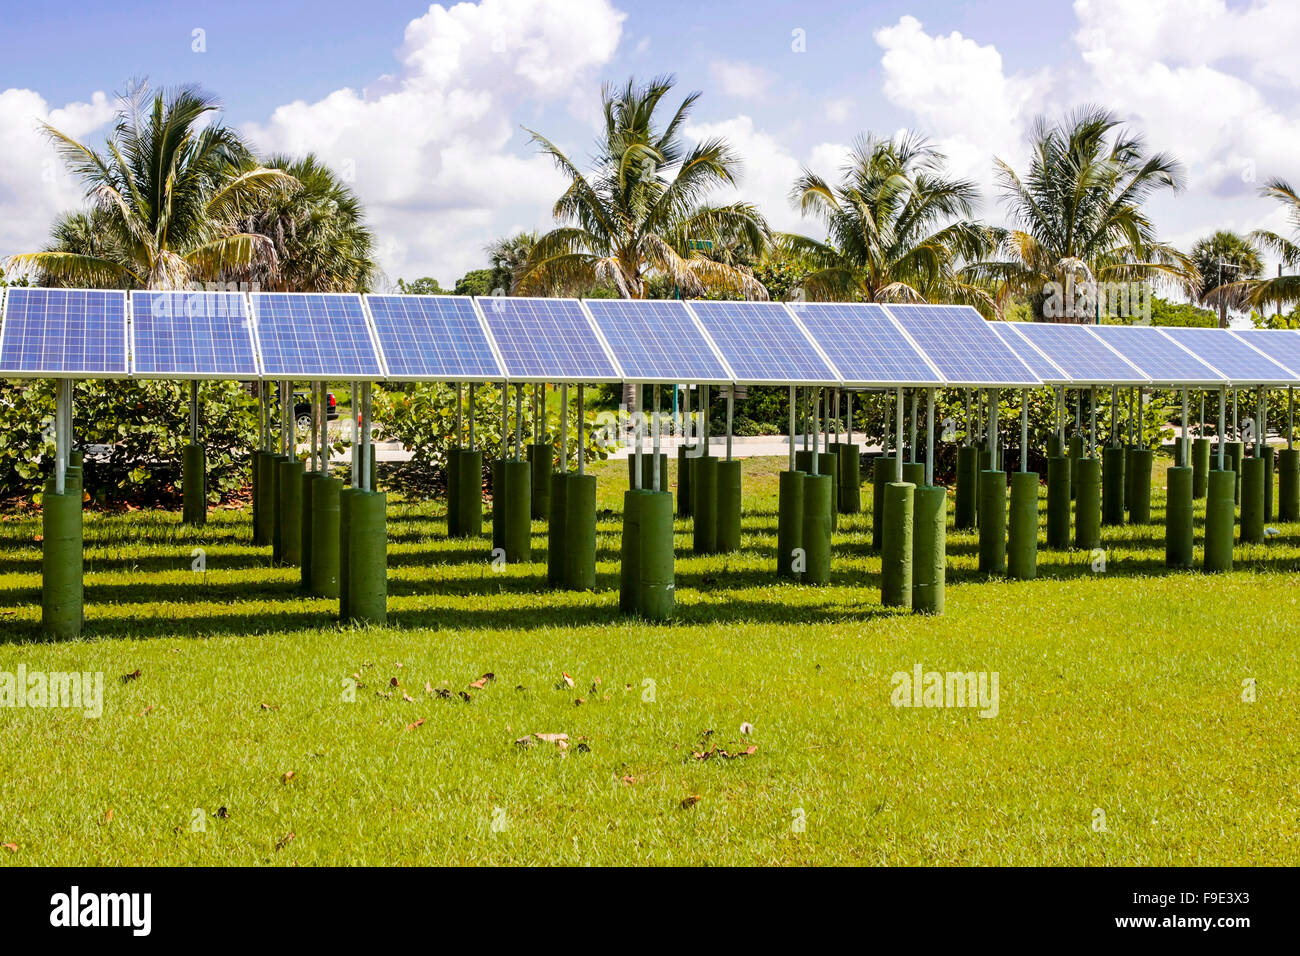 Rows of Solar Panels pointing up to the sunny skies over Florida Stock Photo